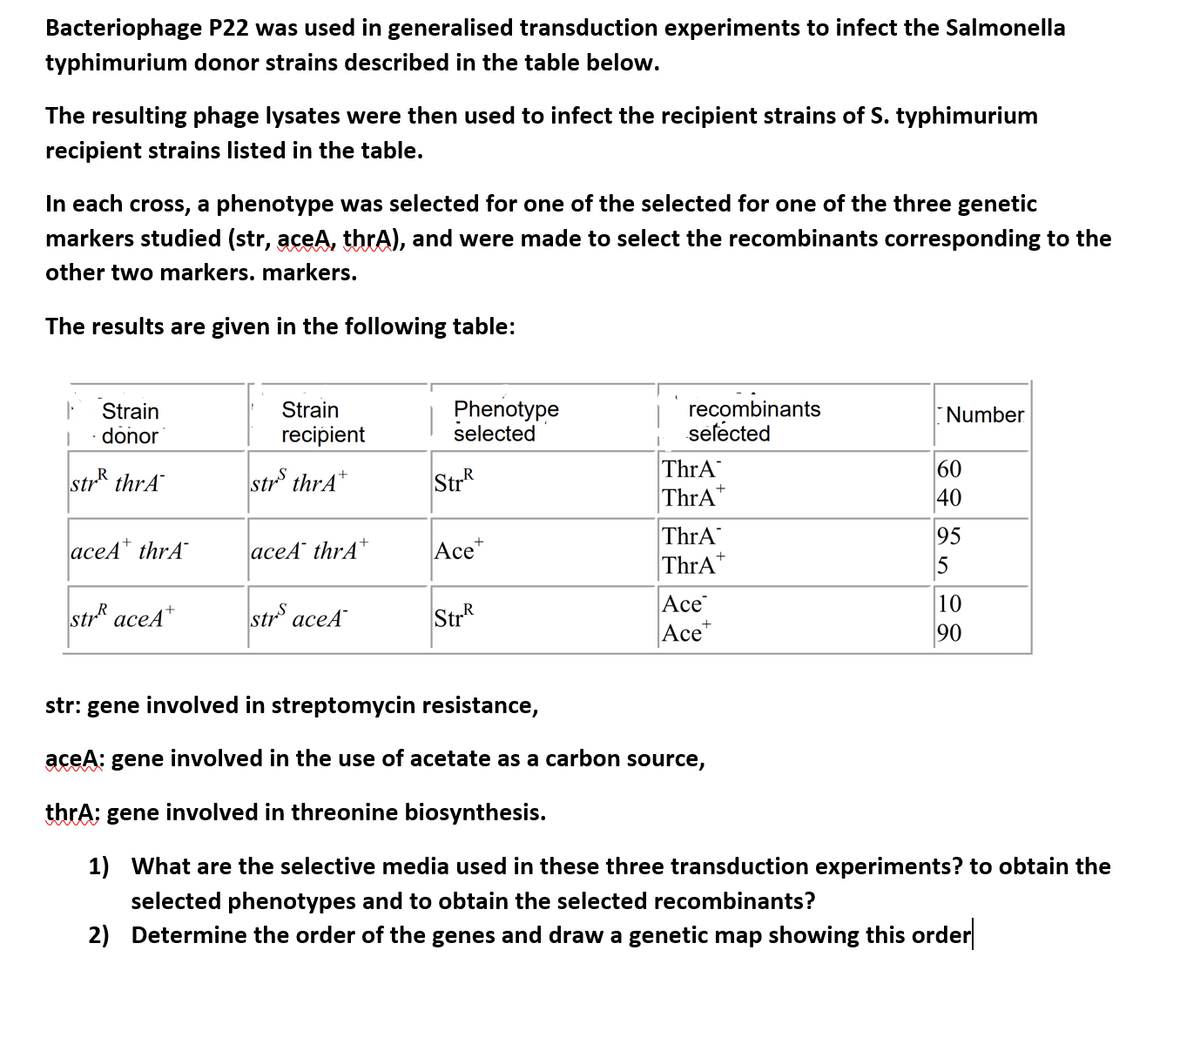 Bacteriophage P22 was used in generalised transduction experiments to infect the Salmonella
typhimurium donor strains described in the table below.
The resulting phage lysates were then used to infect the recipient strains of S. typhimurium
recipient strains listed in the table.
In each cross, a phenotype was selected for one of the selected for one of the three genetic
markers studied (str, aceA, thrA), and were made to select the recombinants corresponding to the
other two markers. markers.
The results are given in the following table:
Strain
I donor
str thrA
aceA thrA
str aceA+
Strain
recipient
strs thrA+
aceA thrA
str aceA
Phenotype
selected
Str
Ace+
Str
recombinants
selected
ThrA
ThrA
ThrA
ThrA
Ace
Ace
Number
60
40
95
5
10
90
str: gene involved in streptomycin resistance,
aceA: gene involved in the use of acetate as a carbon source,
thrA: gene involved in threonine biosynthesis.
1) What are the selective media used in these three transduction experiments? to obtain the
selected phenotypes and to obtain the selected recombinants?
2) Determine the order of the genes and draw a genetic map showing this order